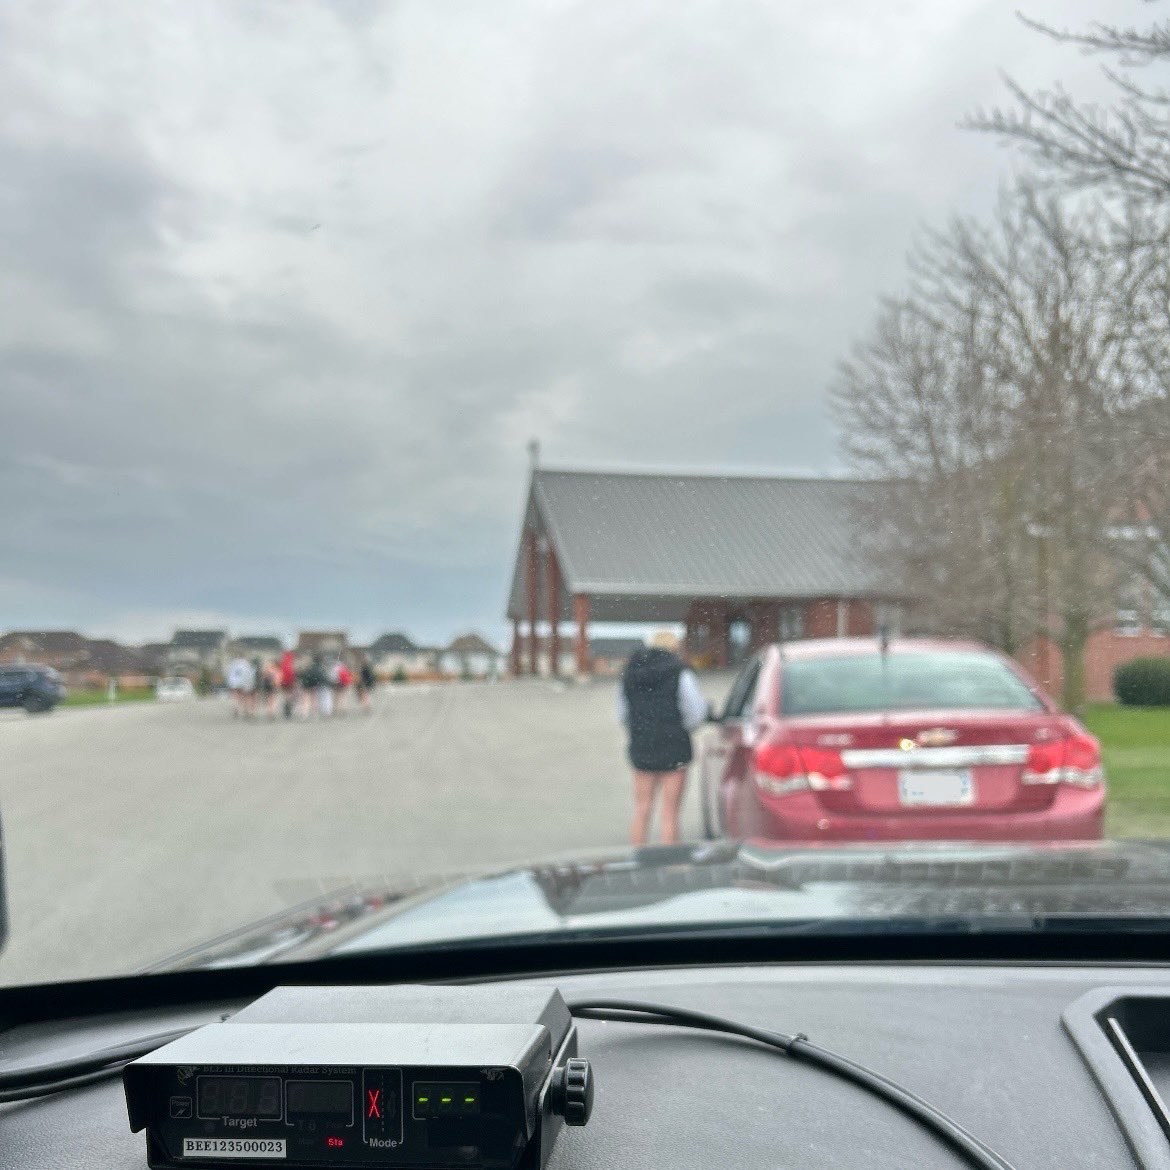 G2 driver charged having more passengers than seatbelts in #portperry. There was a total of 10 youths inside this 5 seater Chevy Cruise, and only 2 wearing seatbelts. This type of stunt driving is unsafe and dangerous. #soccerpractice #durhamvisionzero #scugog #brock #uxbridge cg